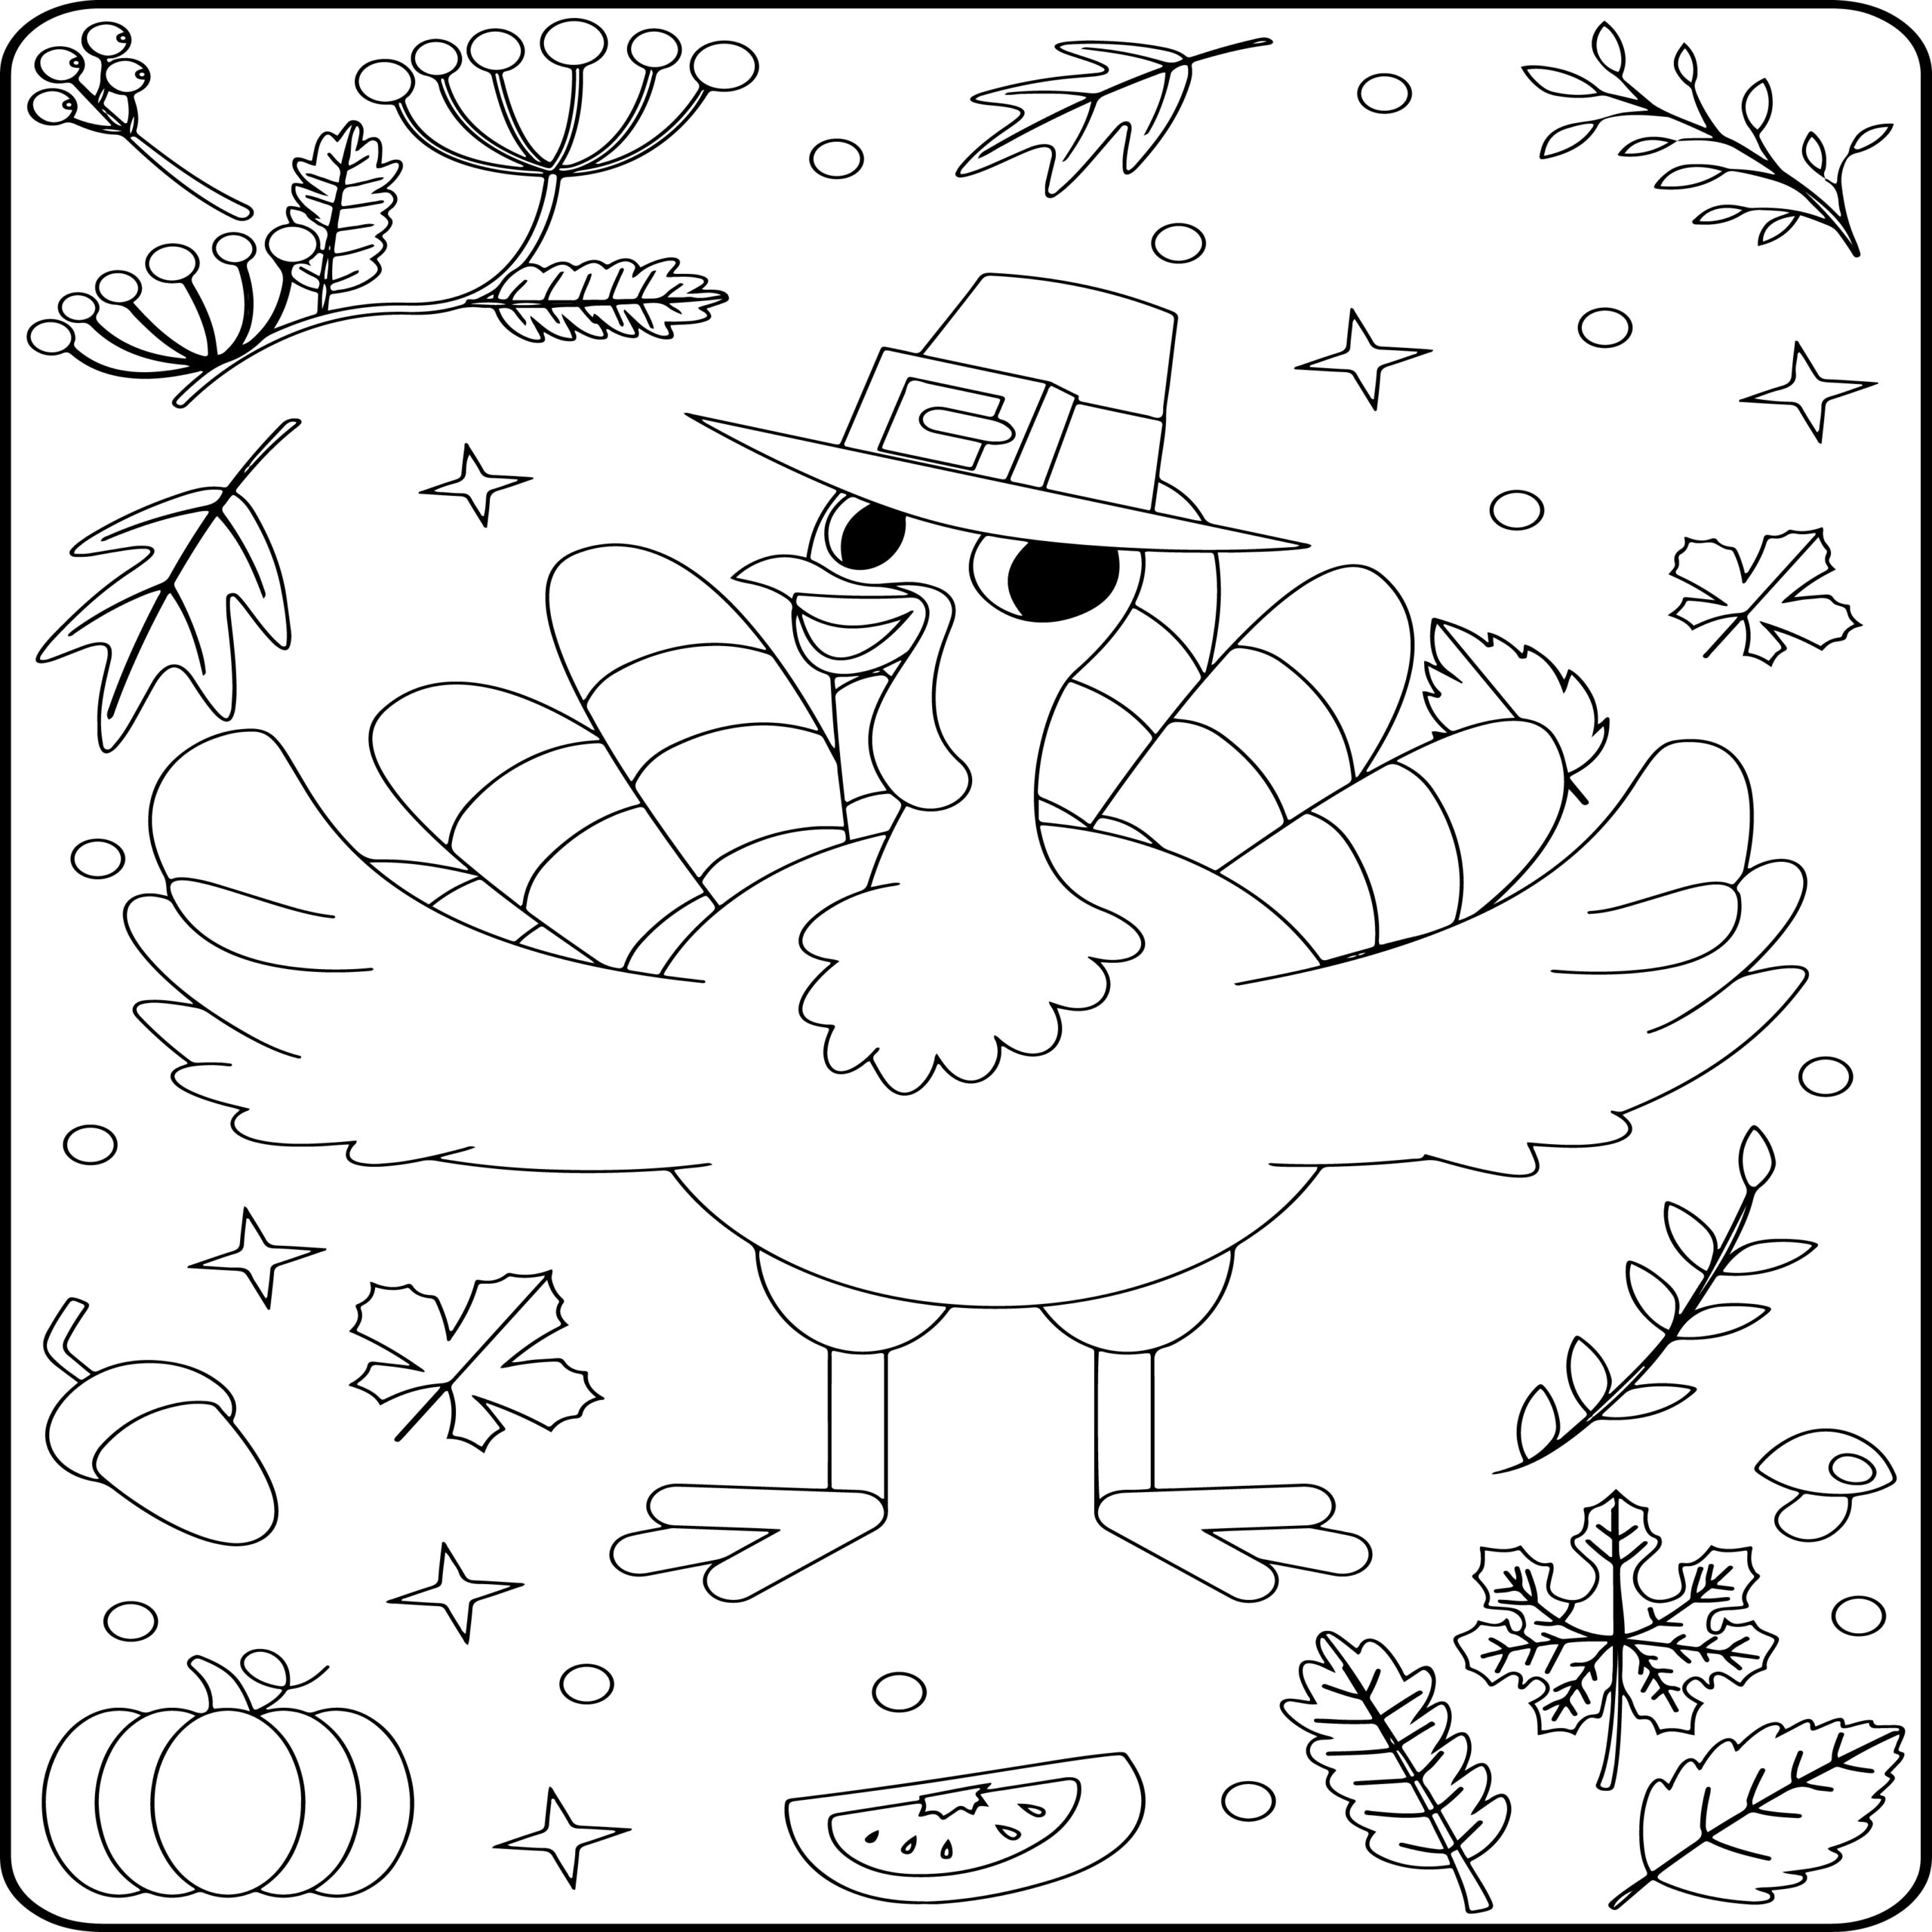 Thanksgiving coloring book for kids cute fun thanksgiving coloring pages made by teachers